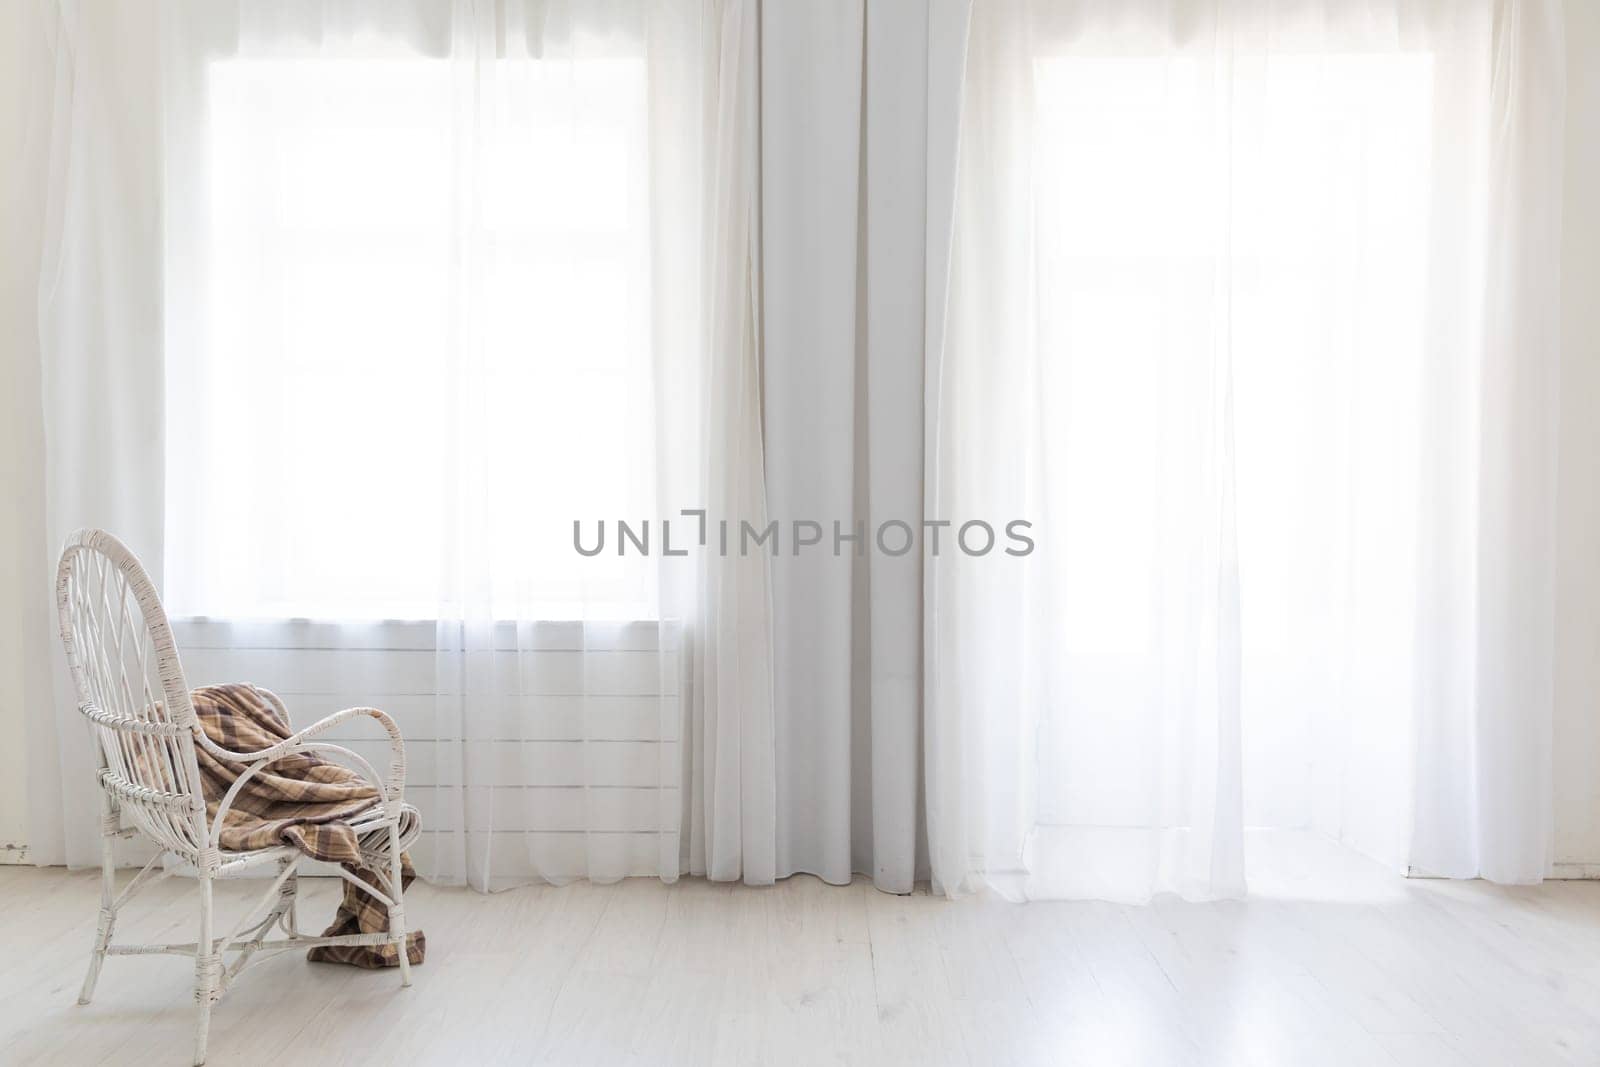 Vintage chair in empty white home room interior by Simakov